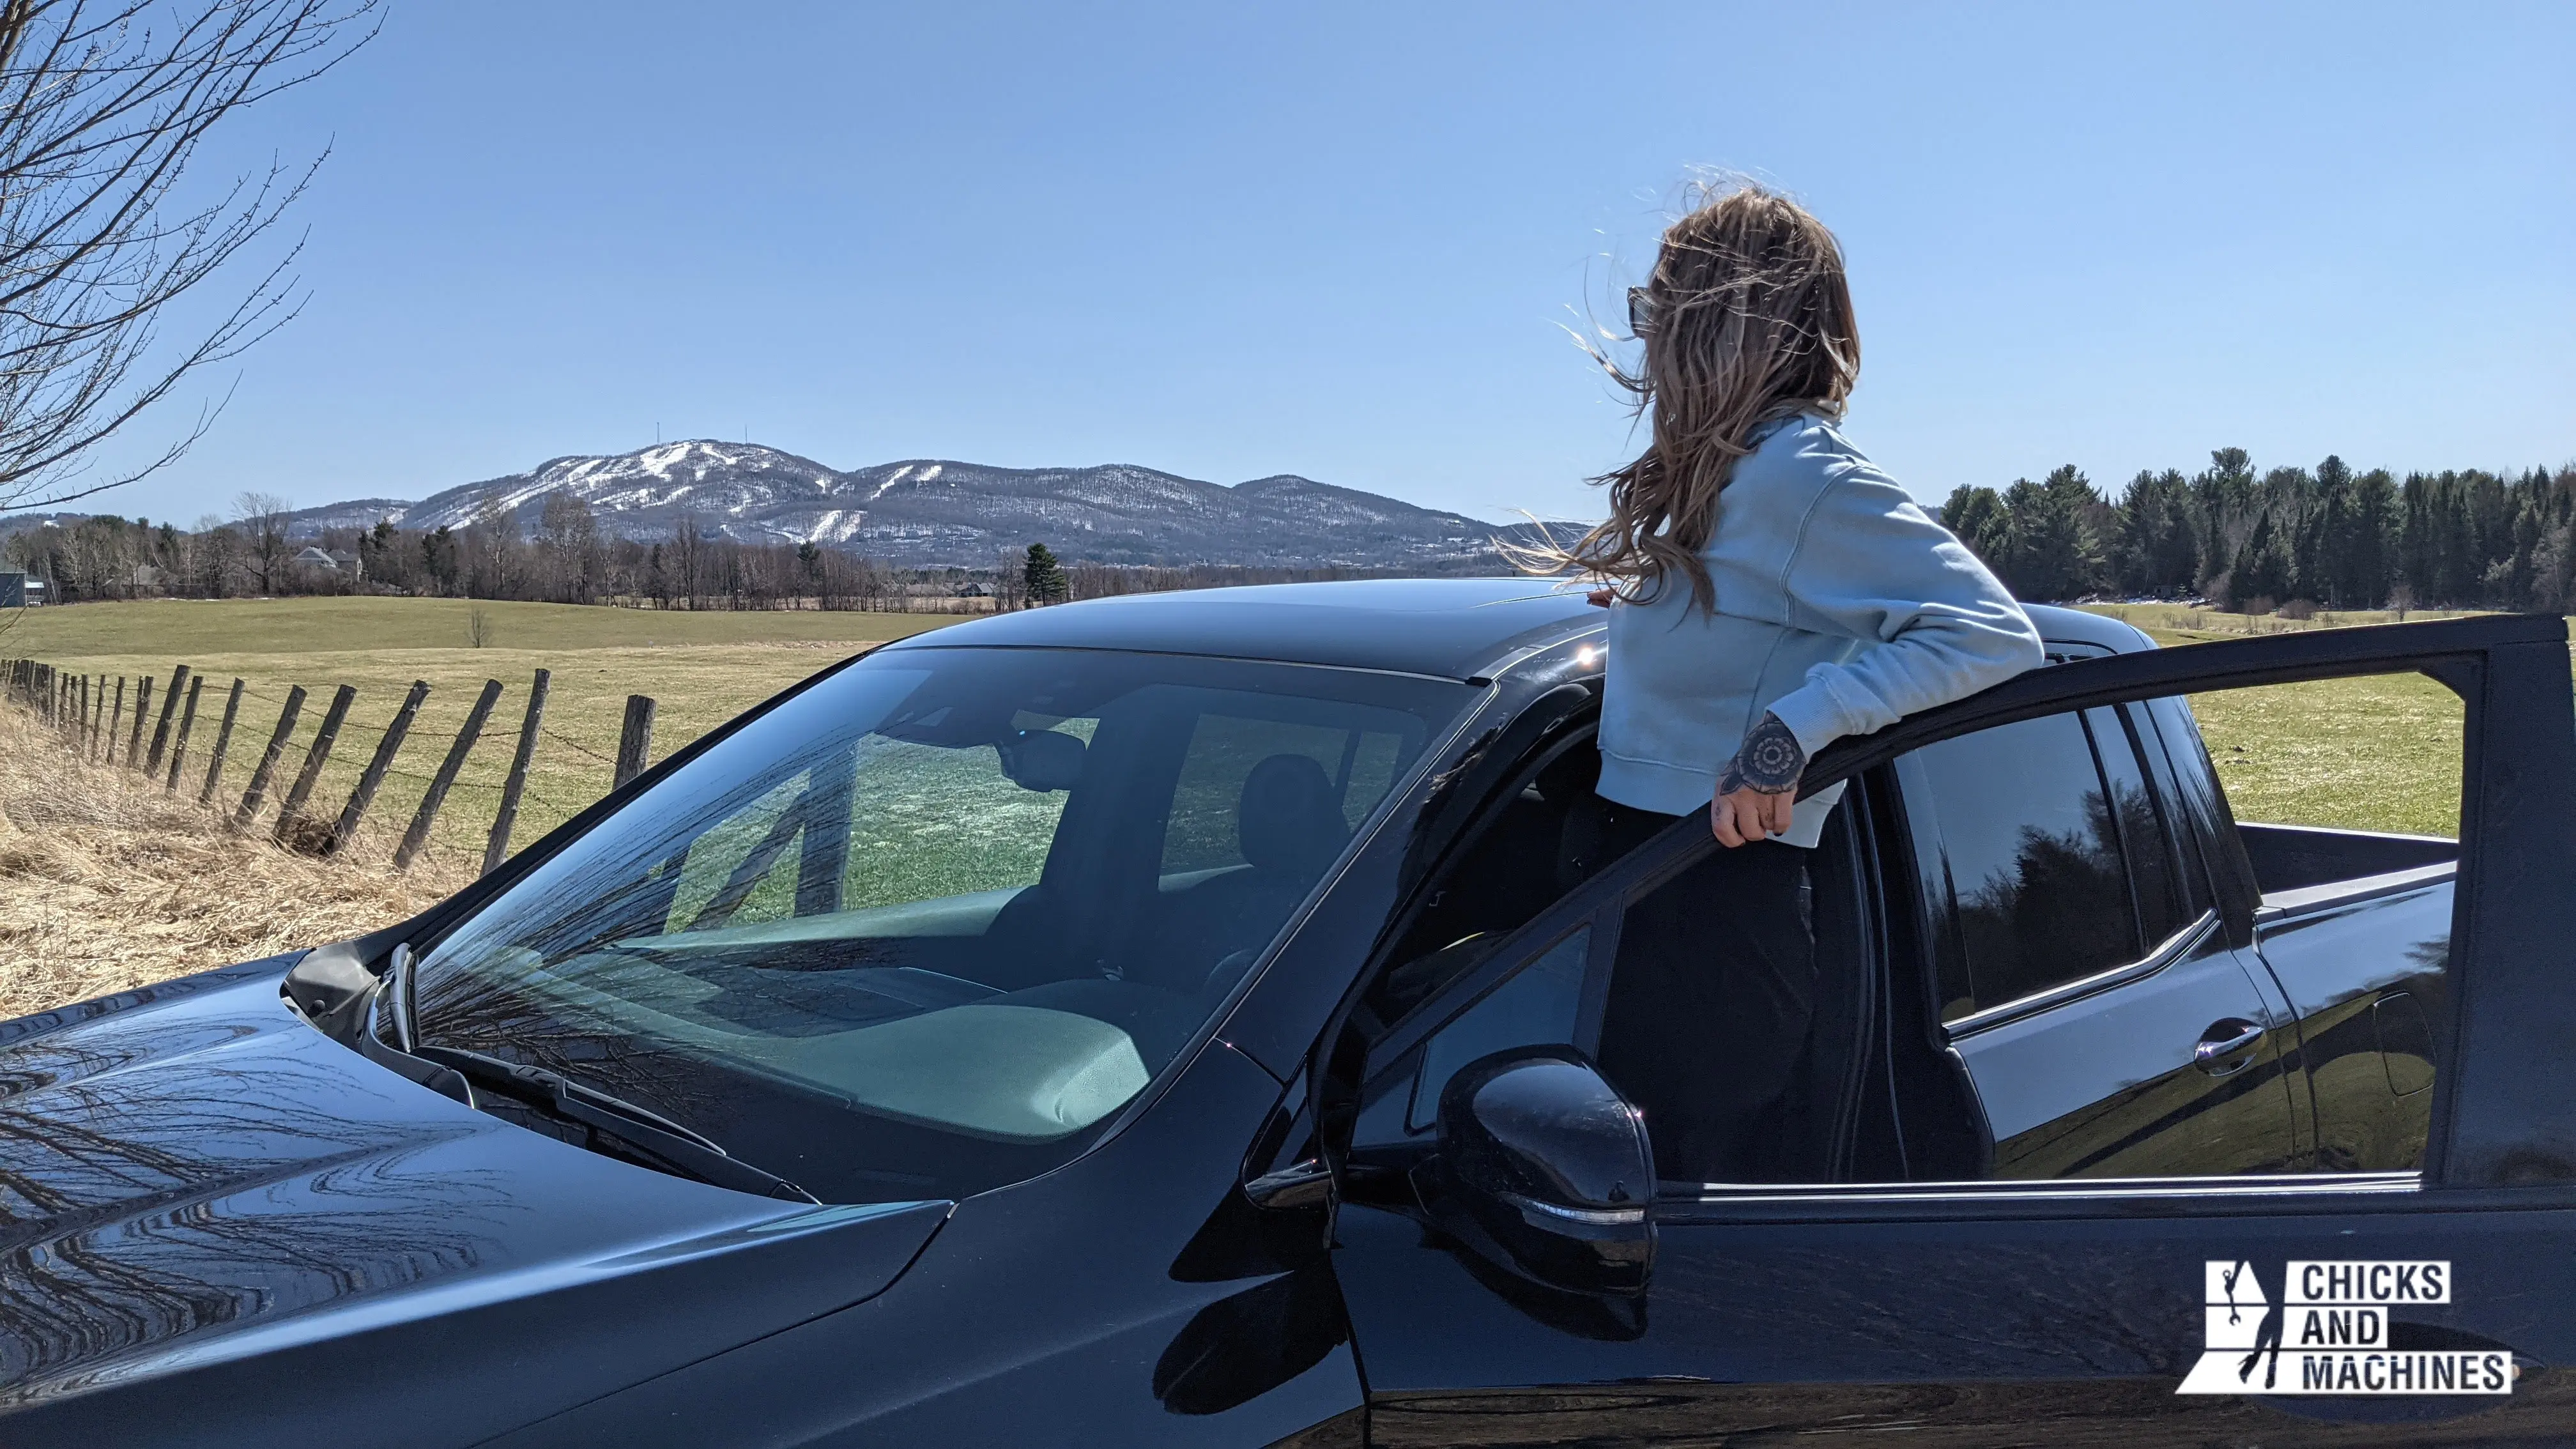 Cyn admires the beautiful scenery at the very end of her road trip in the 2020 Honda Ridgeline Black Edition